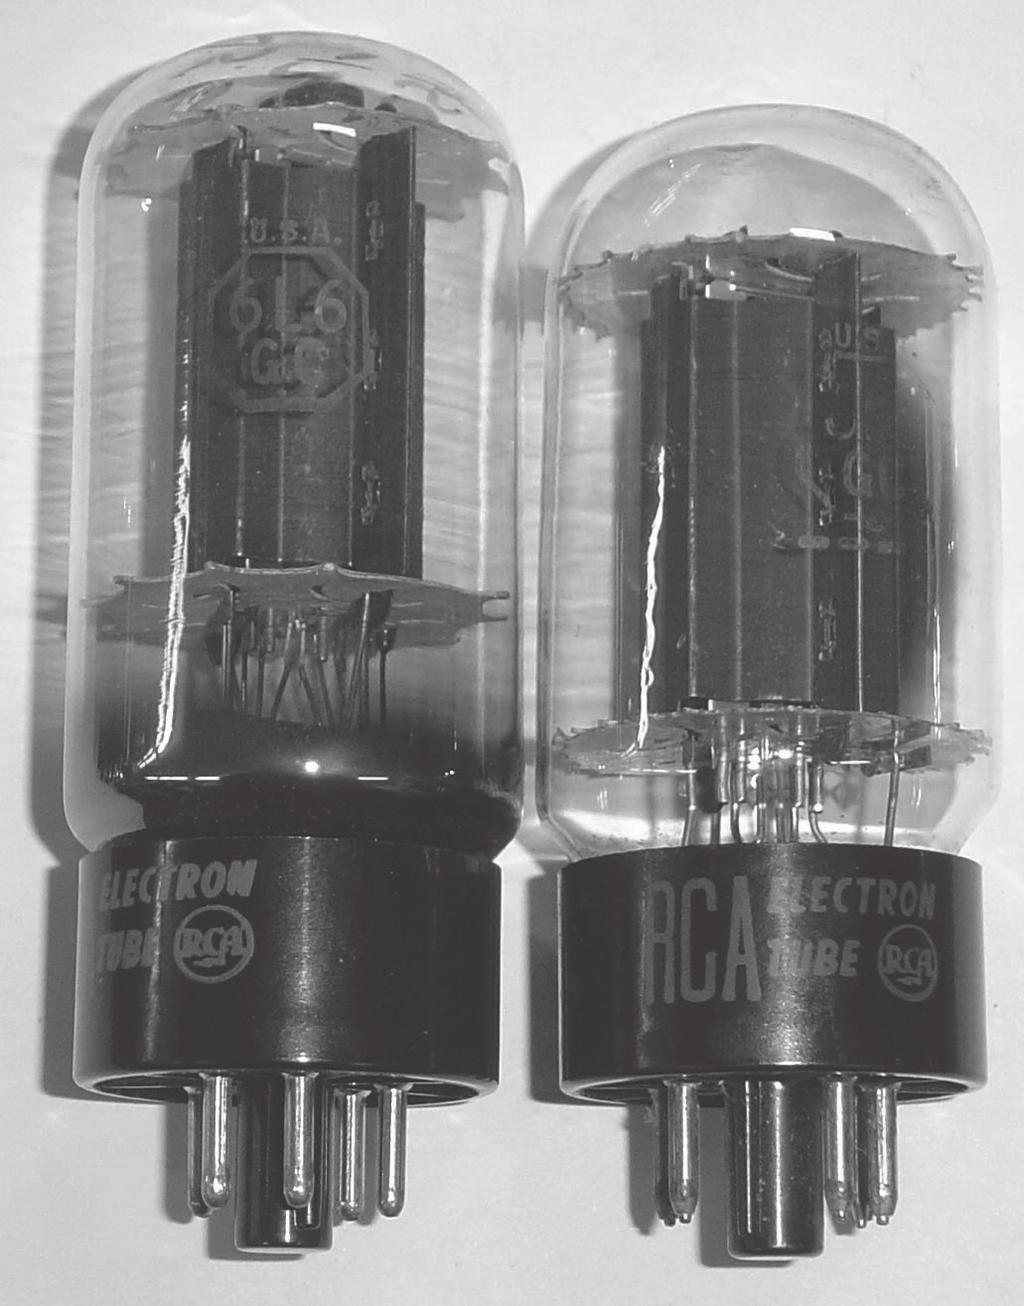 54 The Ultimate Guitar Tone Handbook Power Tubes While preamp tubes boost the guitar s level and shape the tone, and driver tubes prep the signal, power tubes do the heavy lifting of amplification.